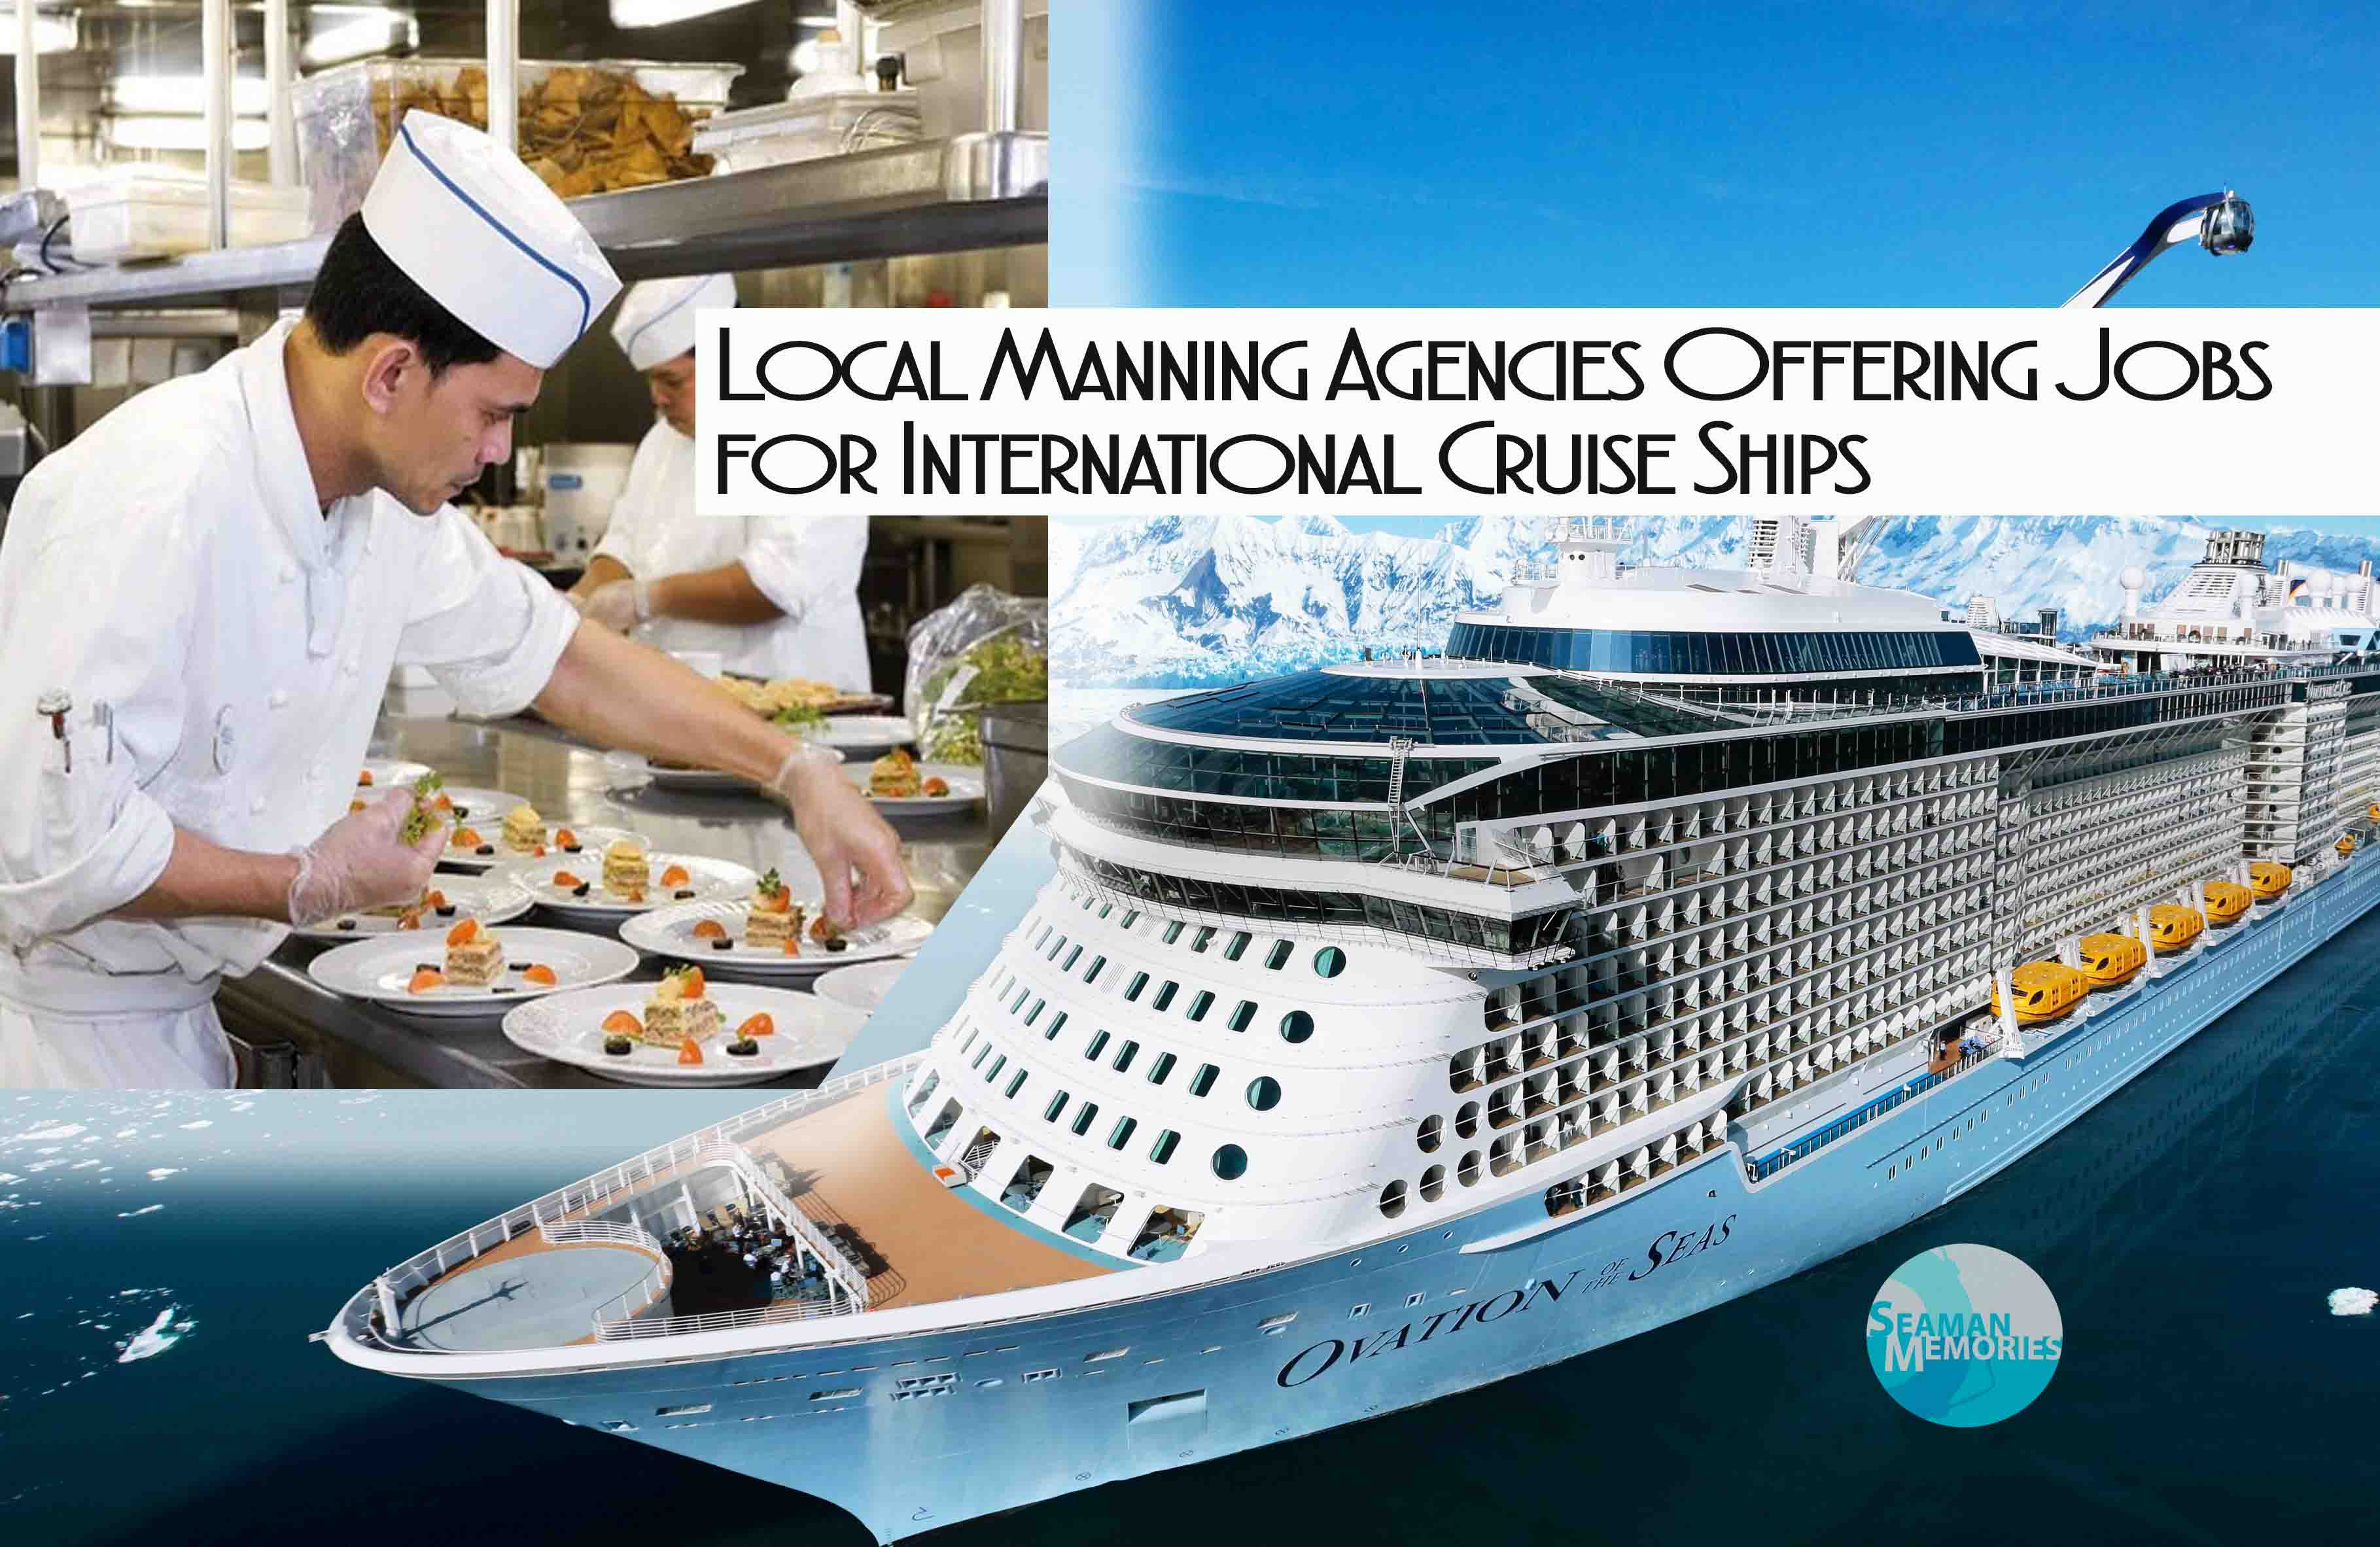 Local Manning Agencies Offering Jobs for International Cruise Ships